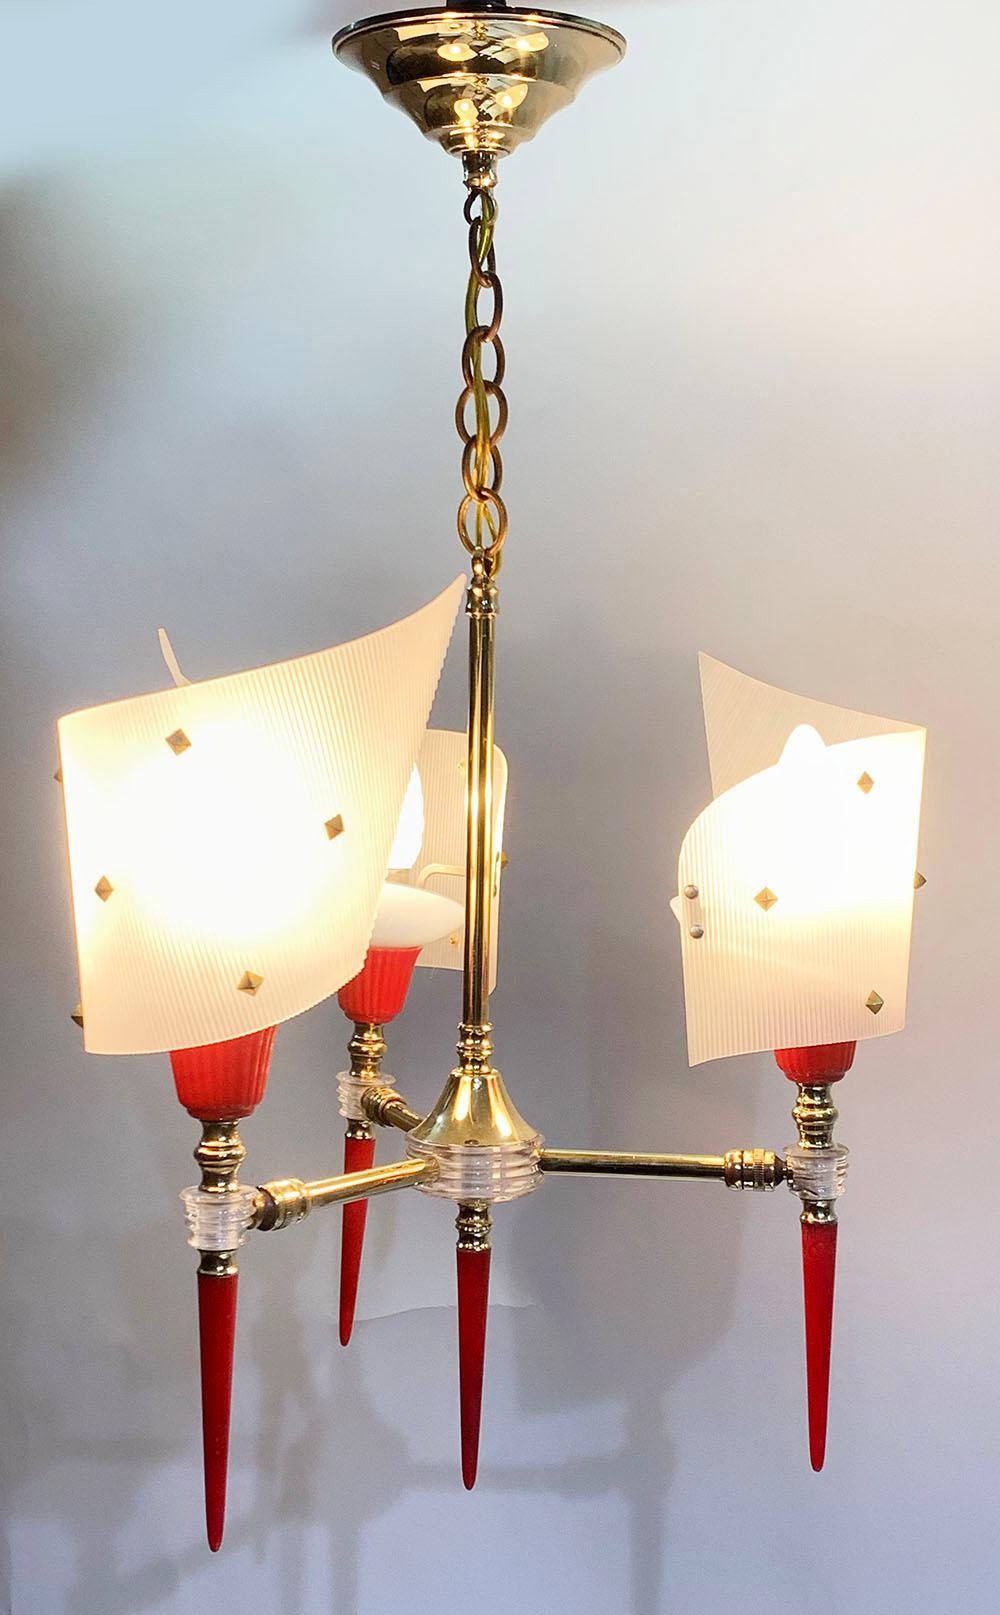 French Mid-Century Modern plastic and brass painter palette Set in Jean Pierre Guariche style 1950s 1960s 
The set consist of a pendant chandelier and 2 wall sconces.
it's shaped like a painter's palette and the red stem downwards is reminiscent